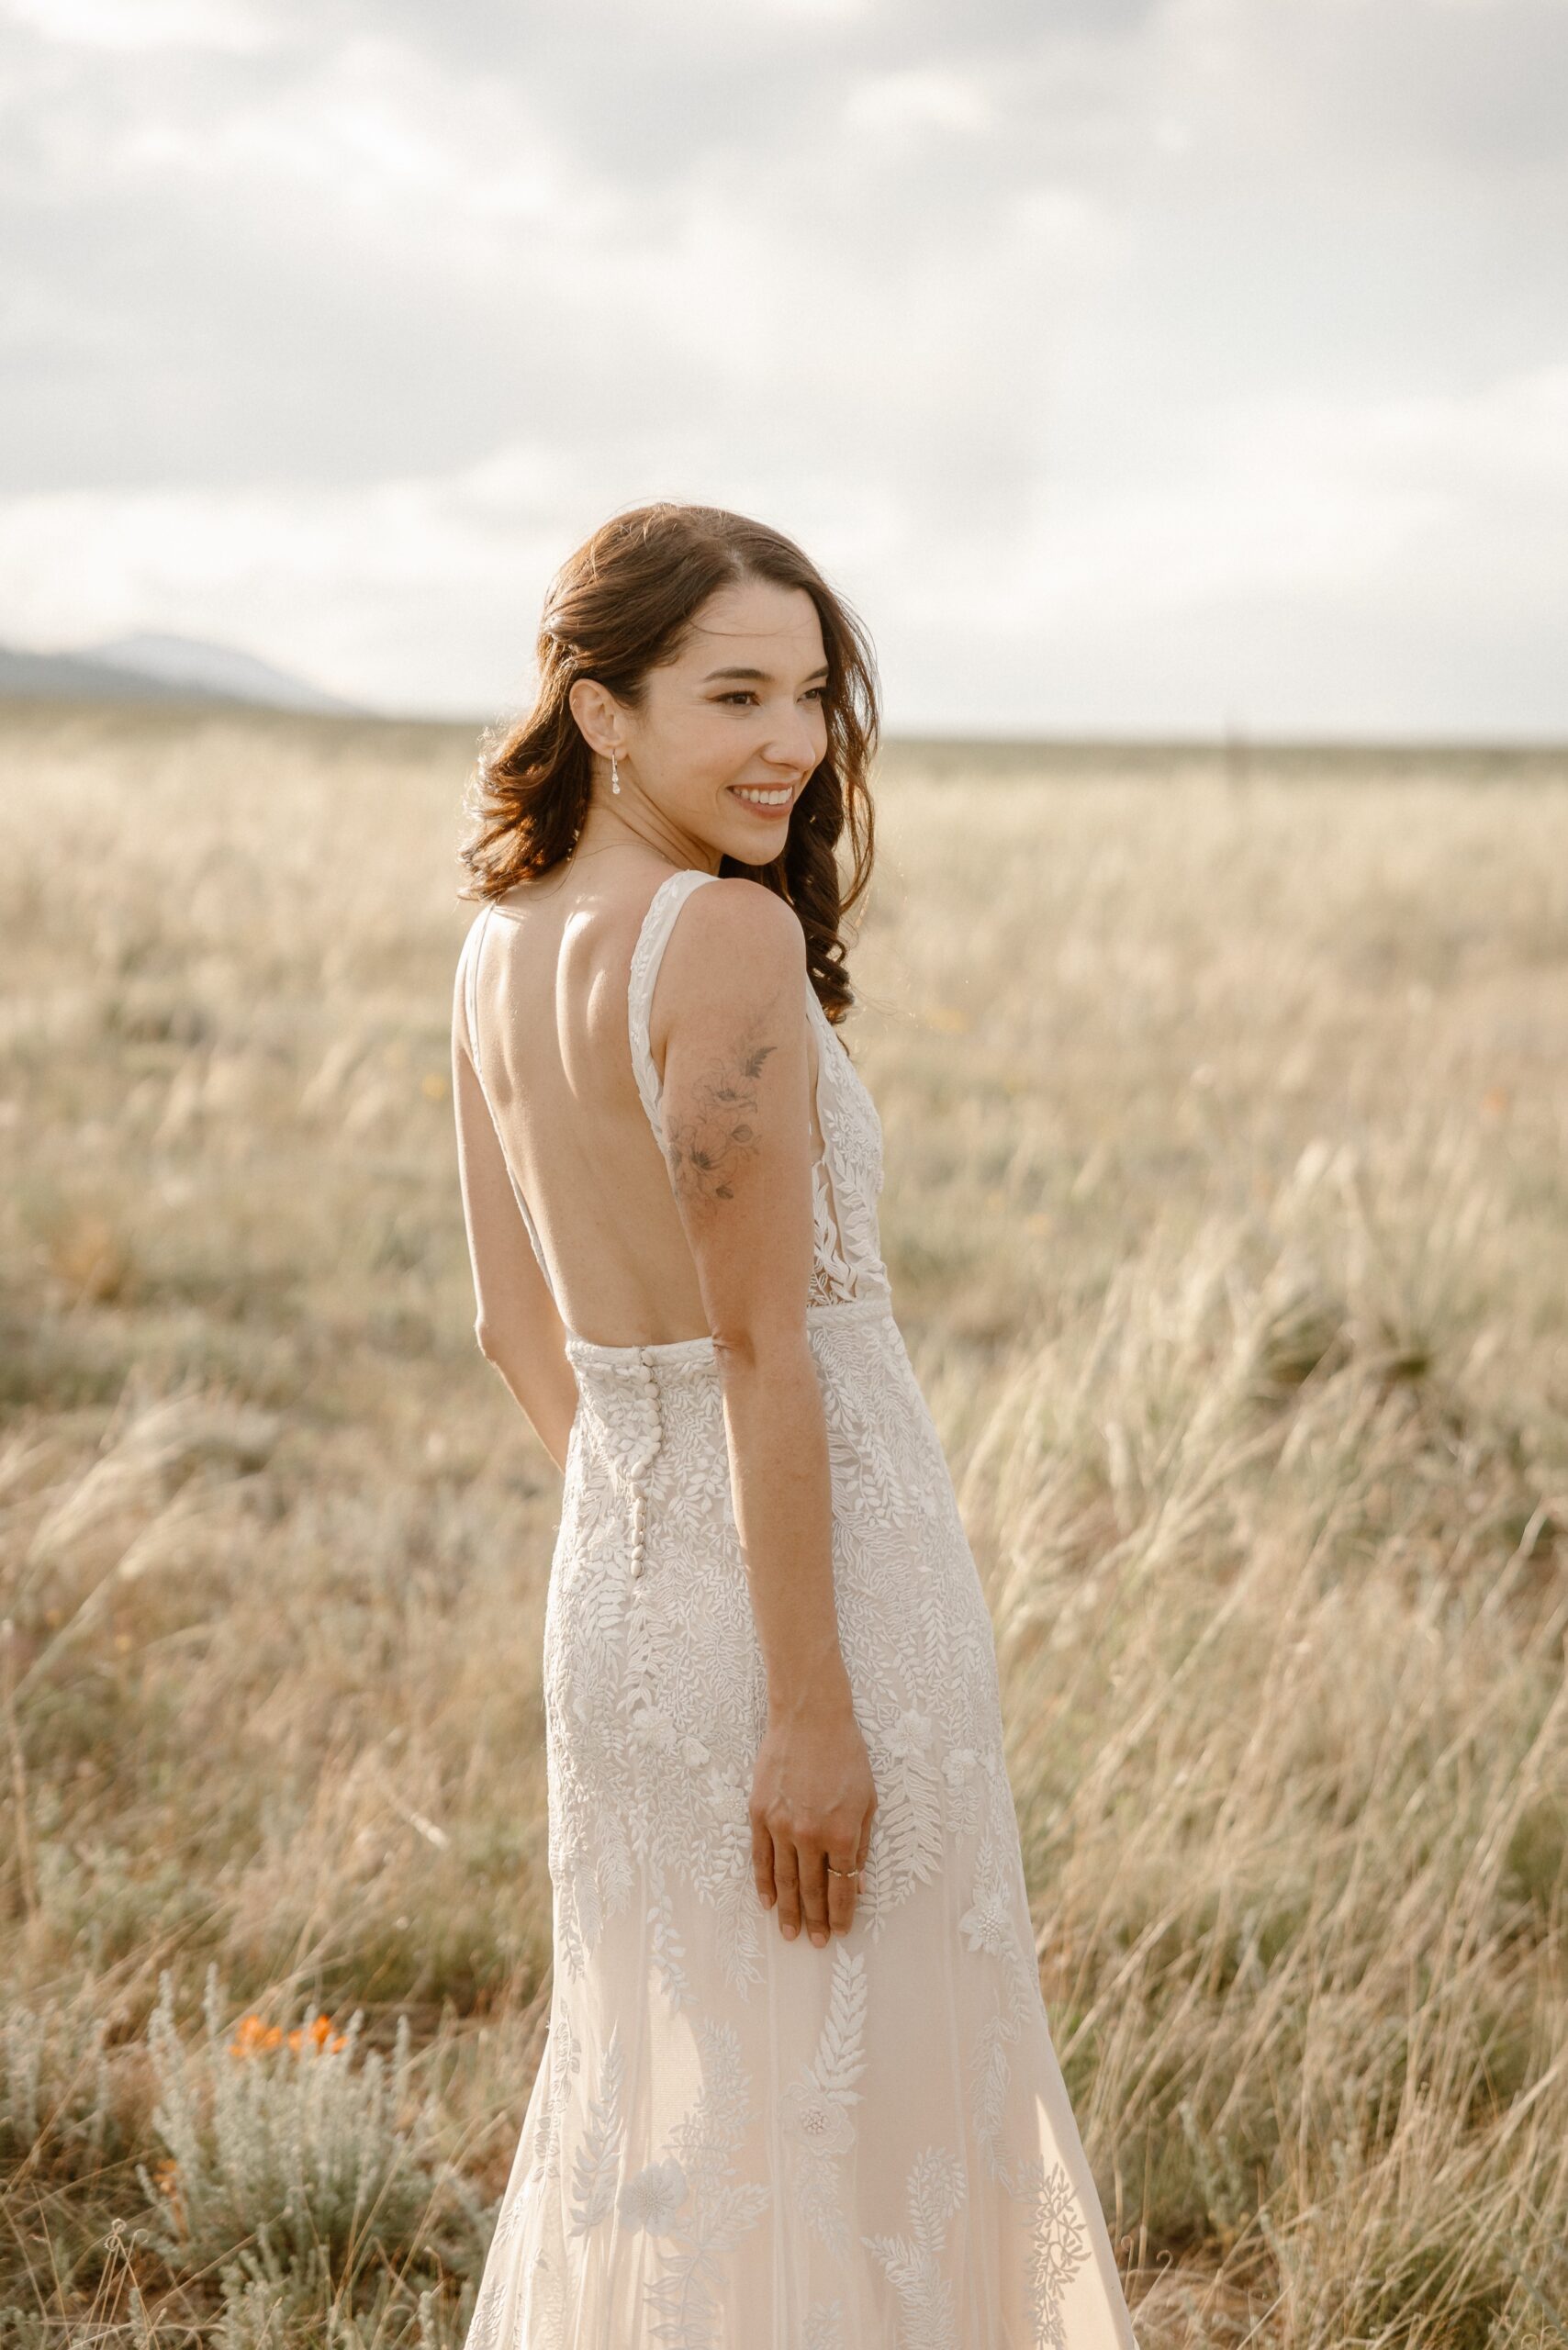 A bride poses for her bridal portraits in a grassy field with the sun setting behind her. Photo by Ashley Joyce.